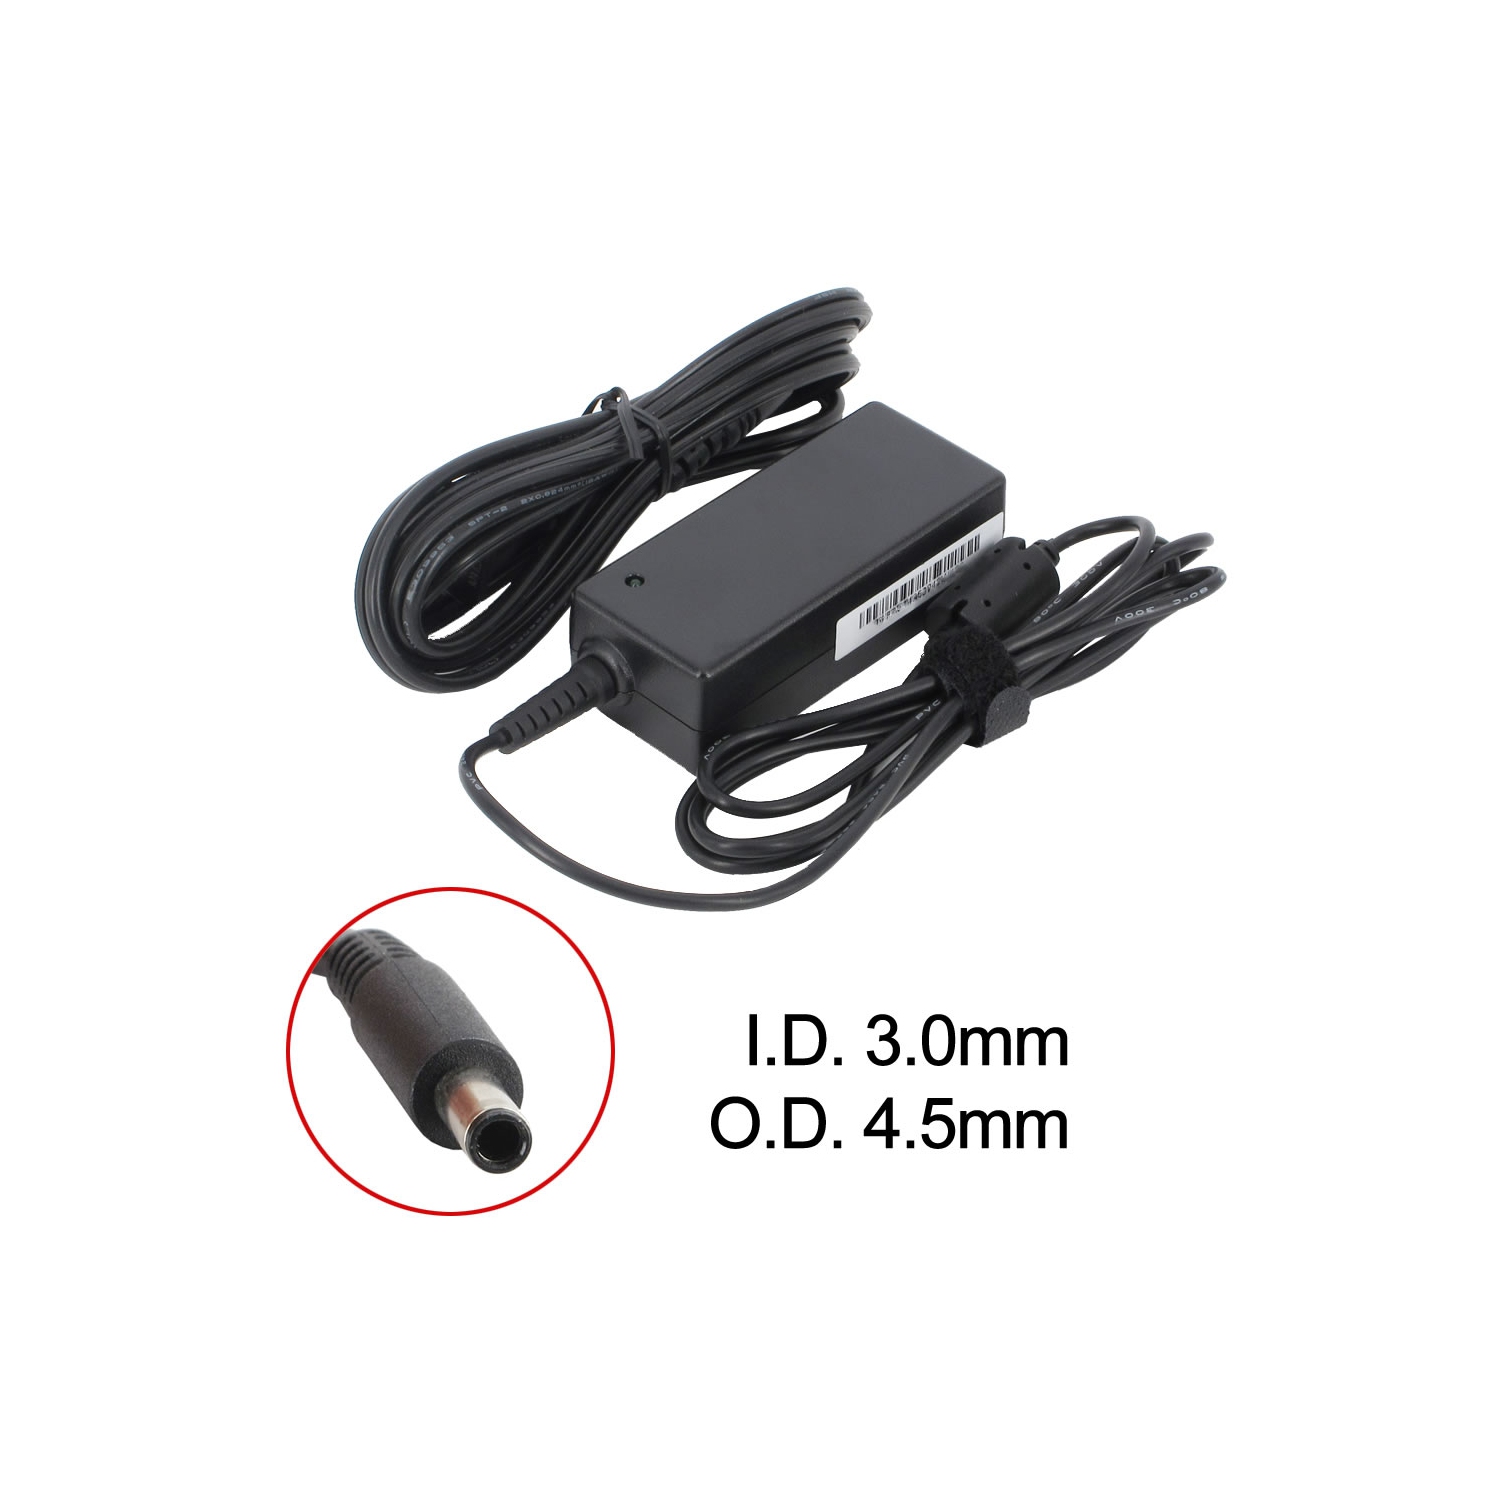 BattDepot: New Replacement Laptop AC Adapter for Dell XPS 12, 332-1827, D0KFY, FA45NE1-00, LA45NM140, RFRWK